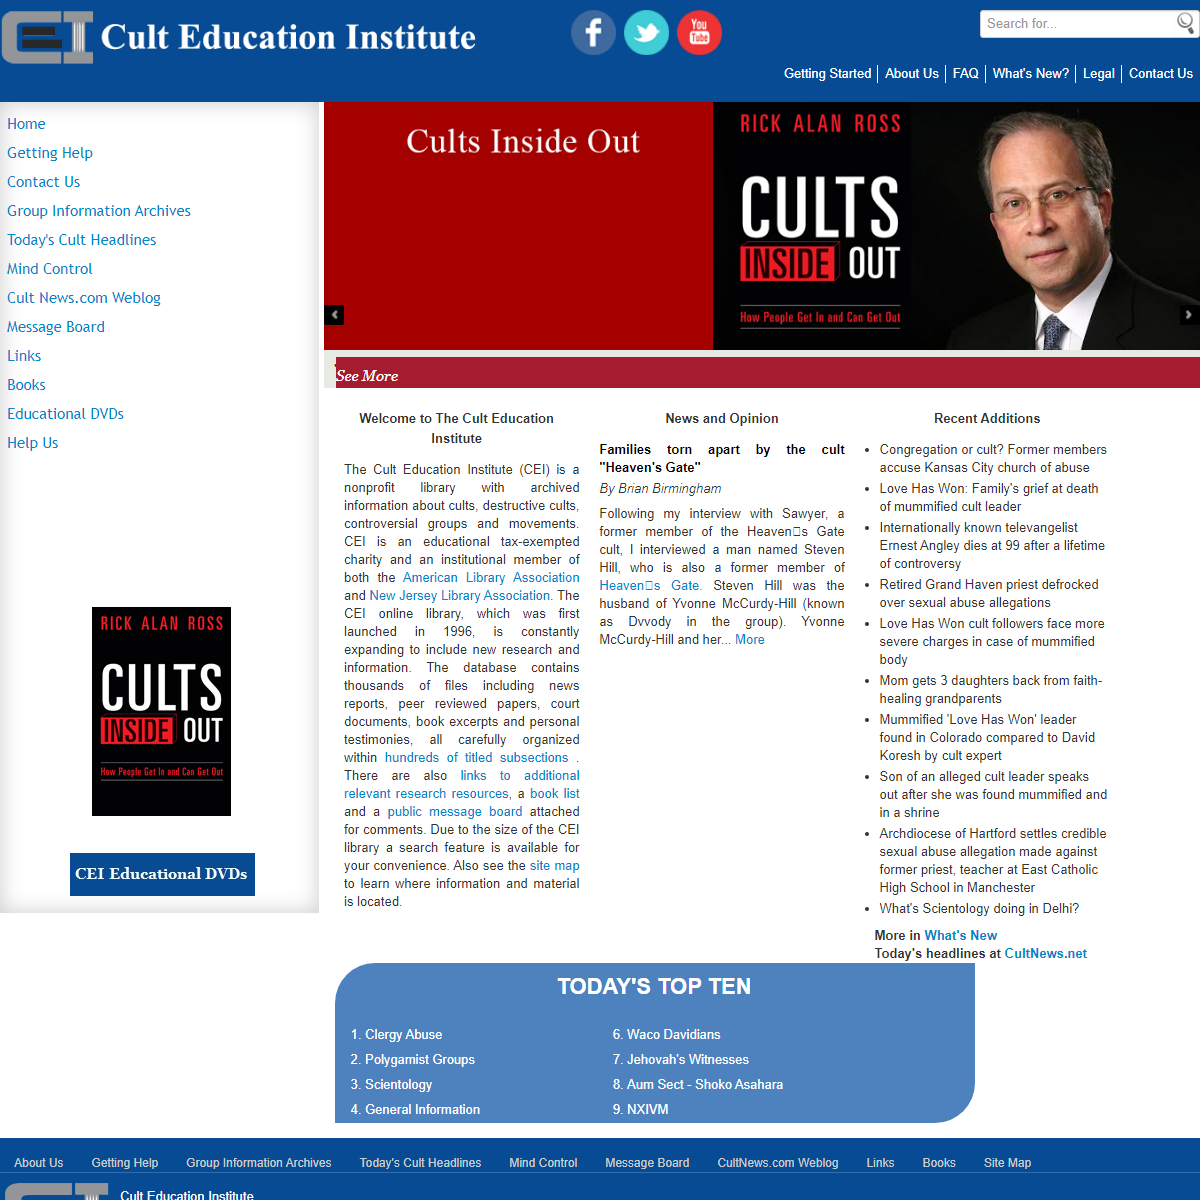 A complete backup of https://www.culteducation.com/